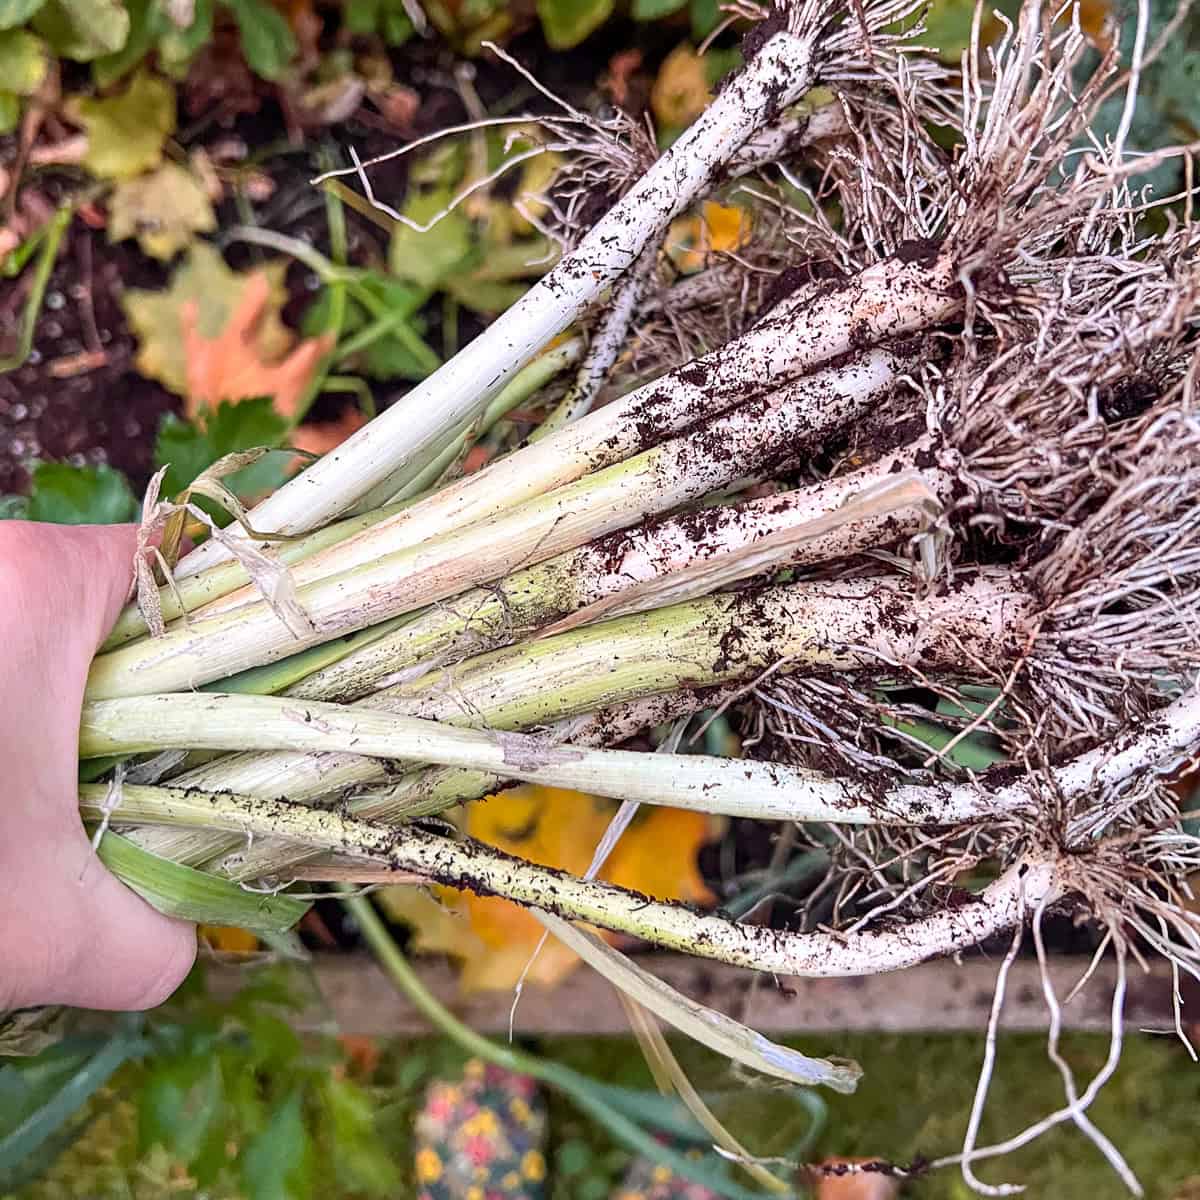 An image of a woman's hand holding a bunch of leeks.